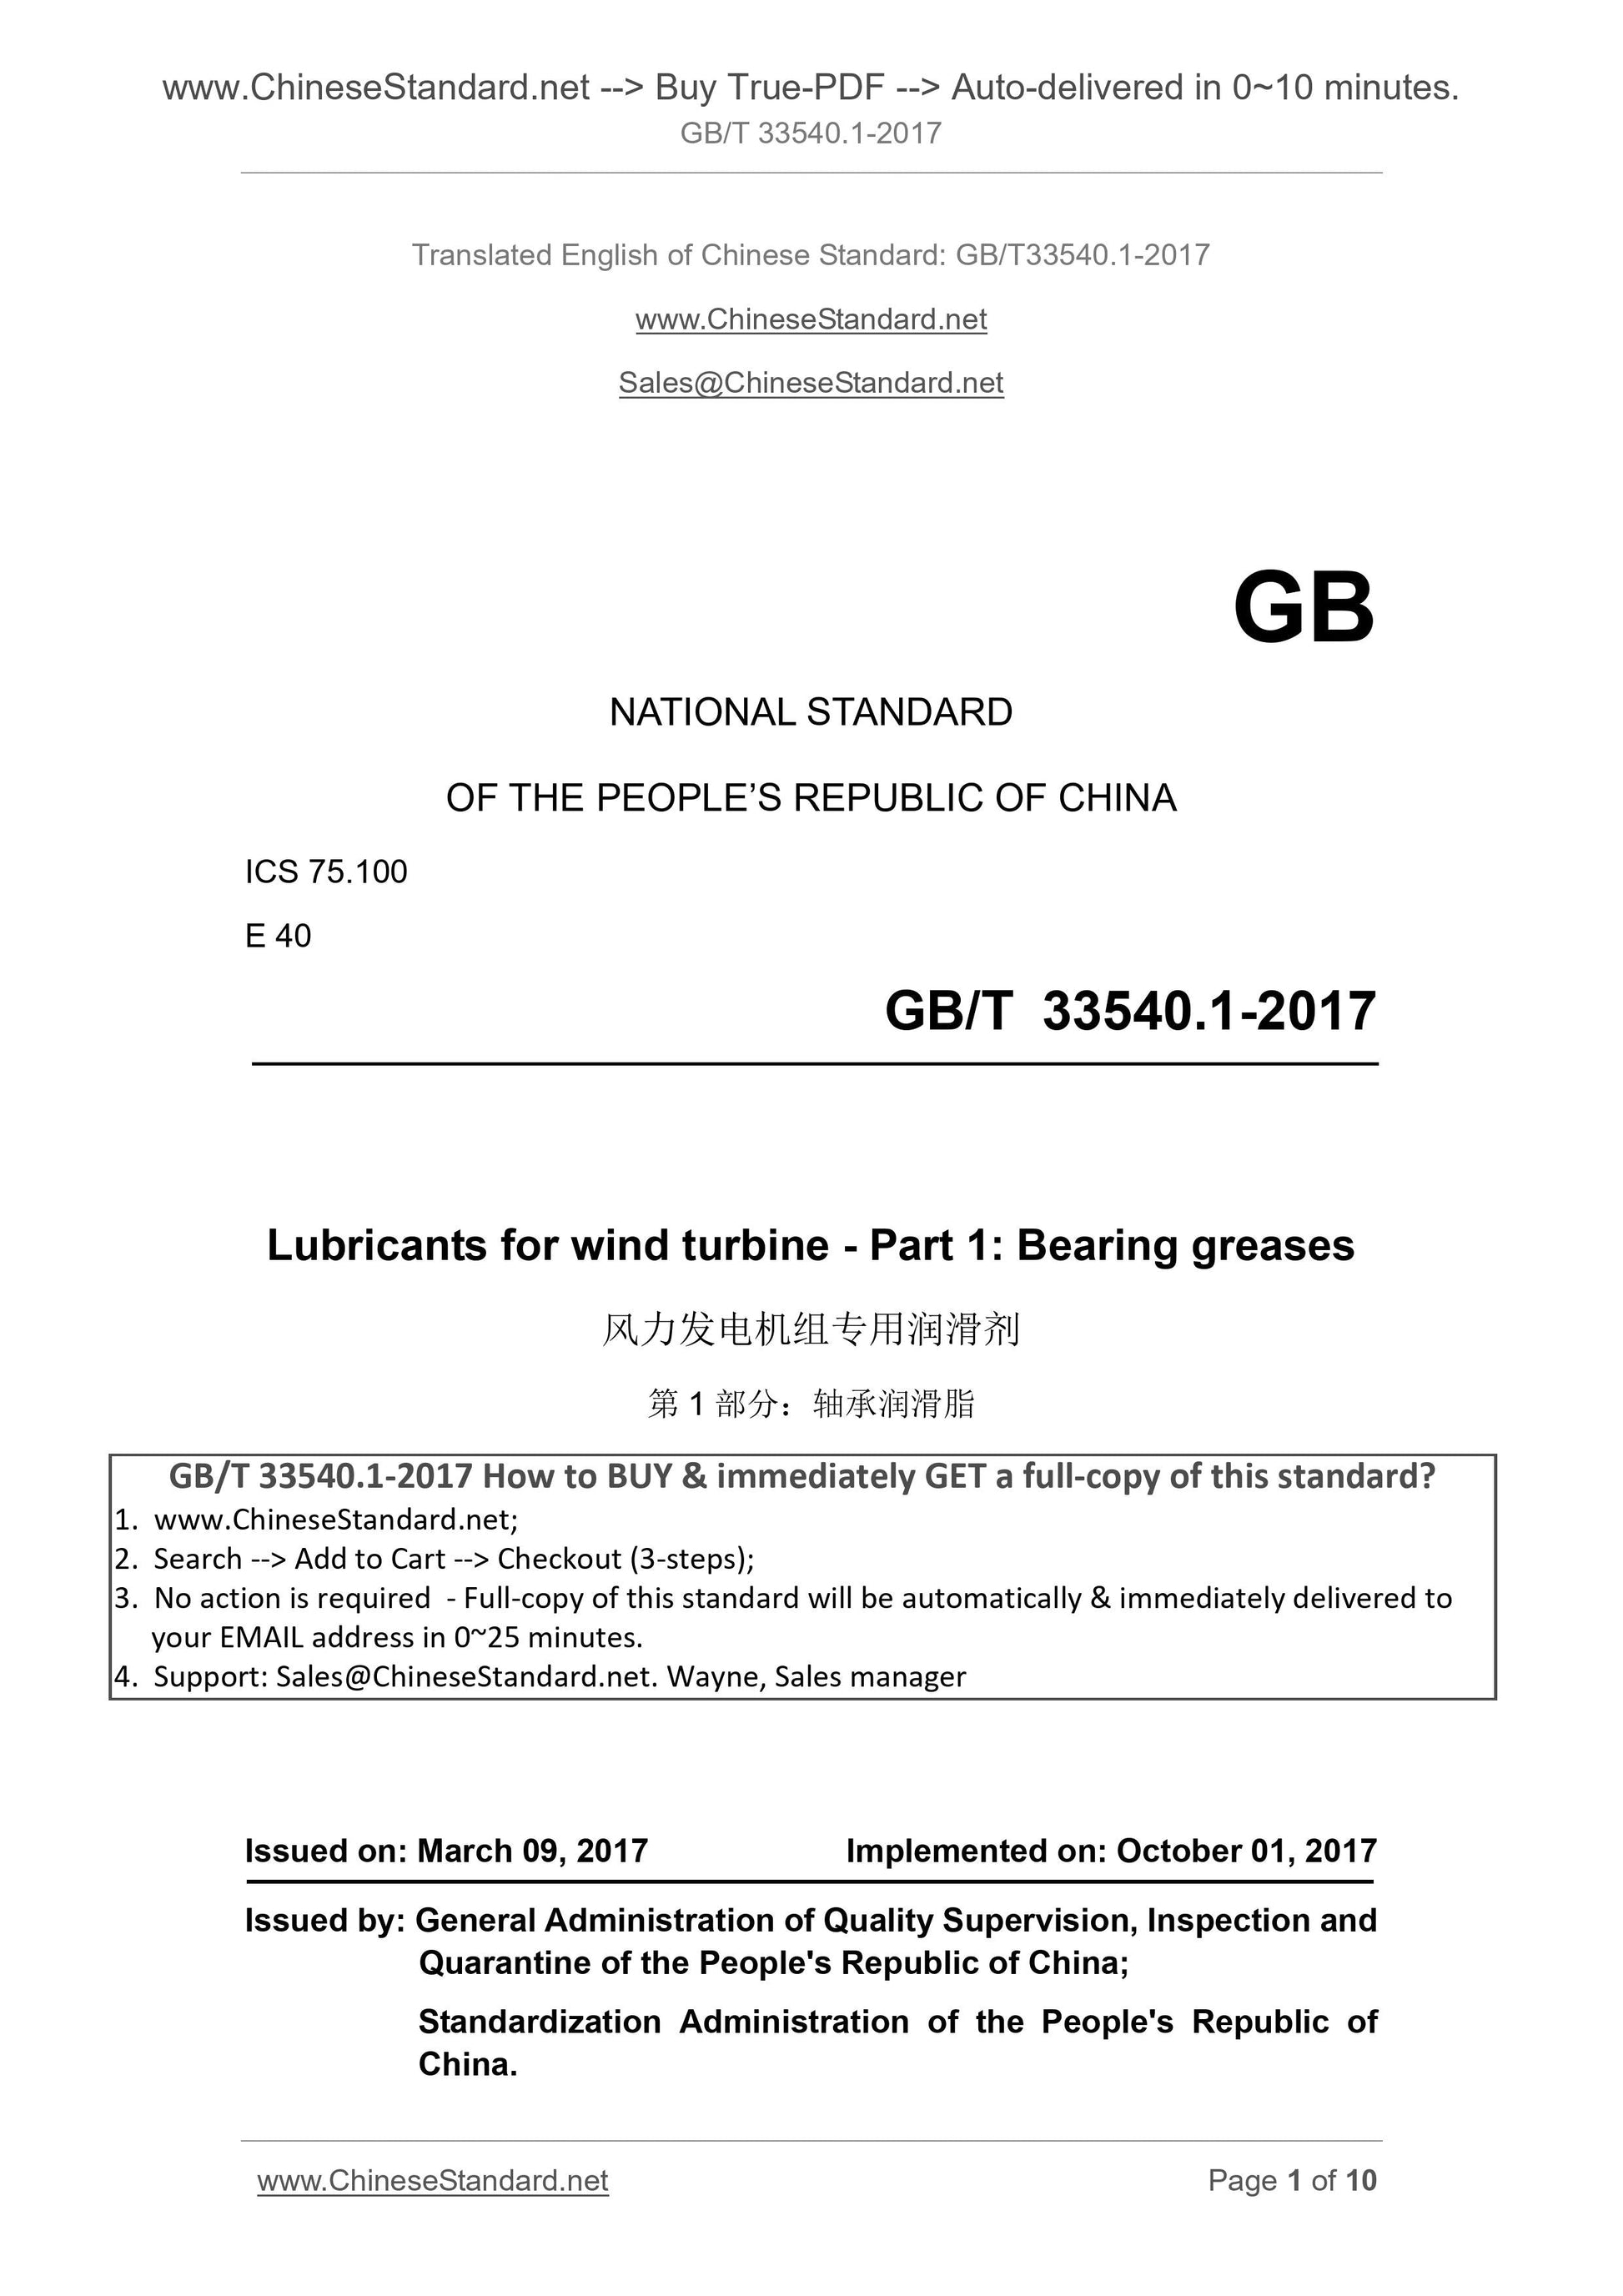 GB/T 33540.1-2017 Page 1